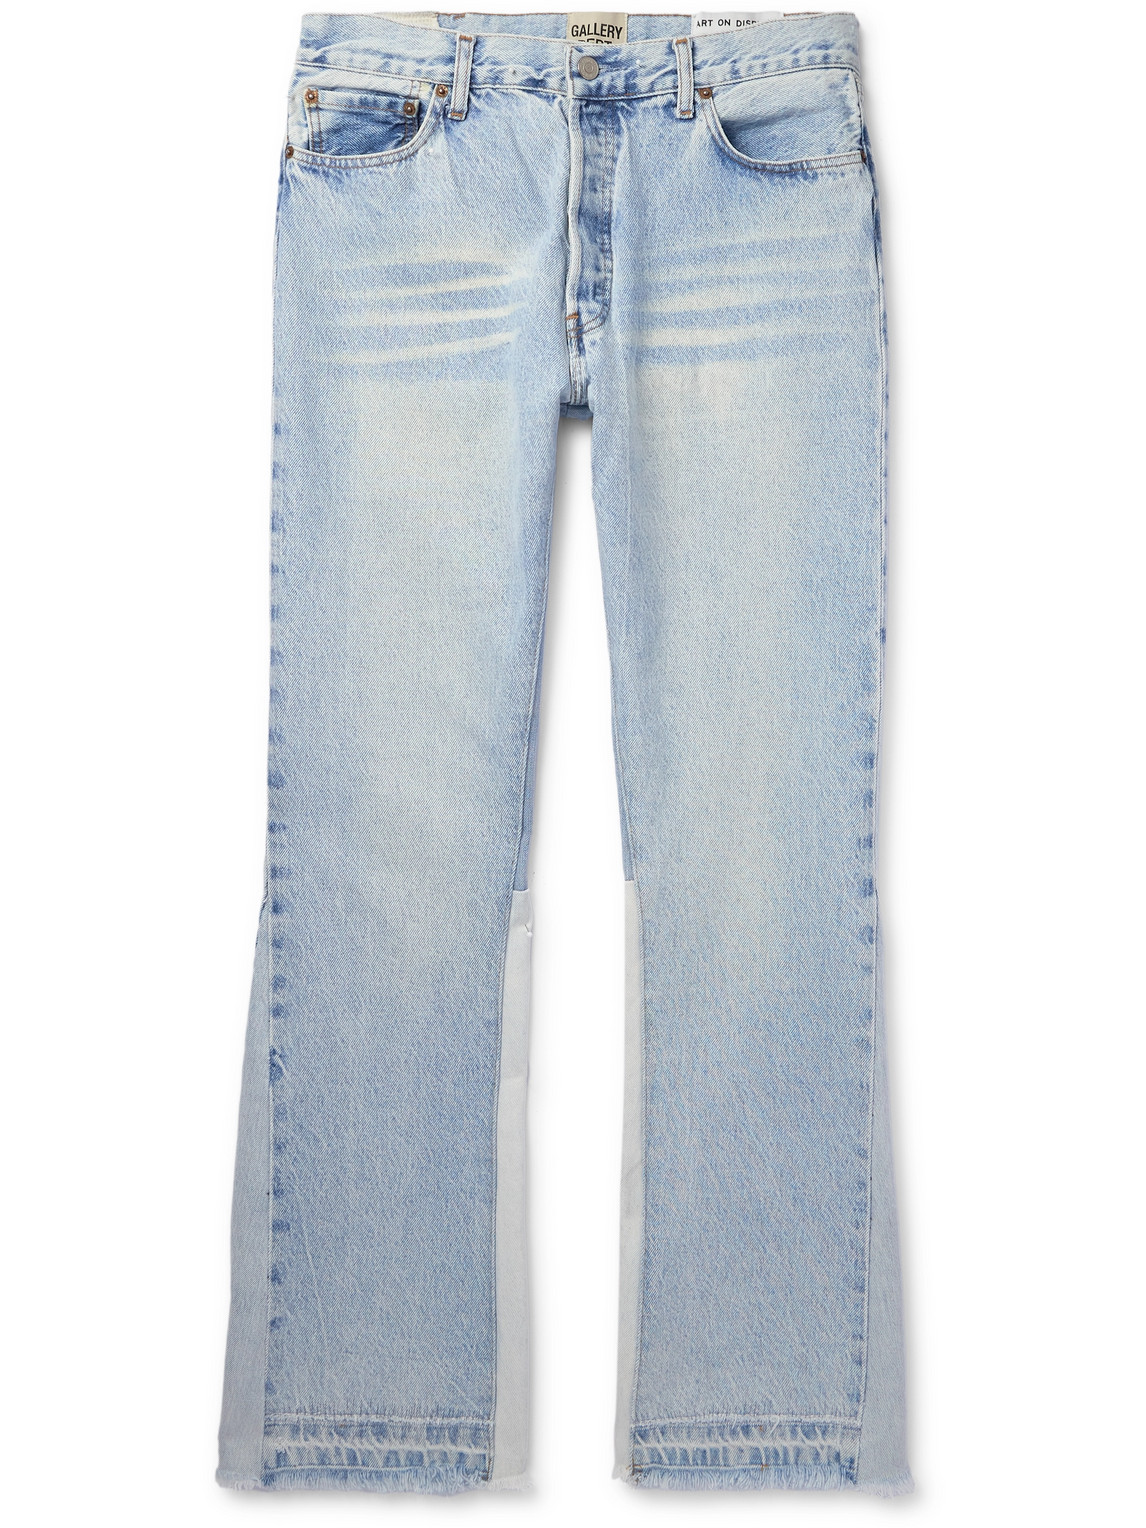 Gallery Dept. 90210 La Flare Flared Panelled Jeans In Blue